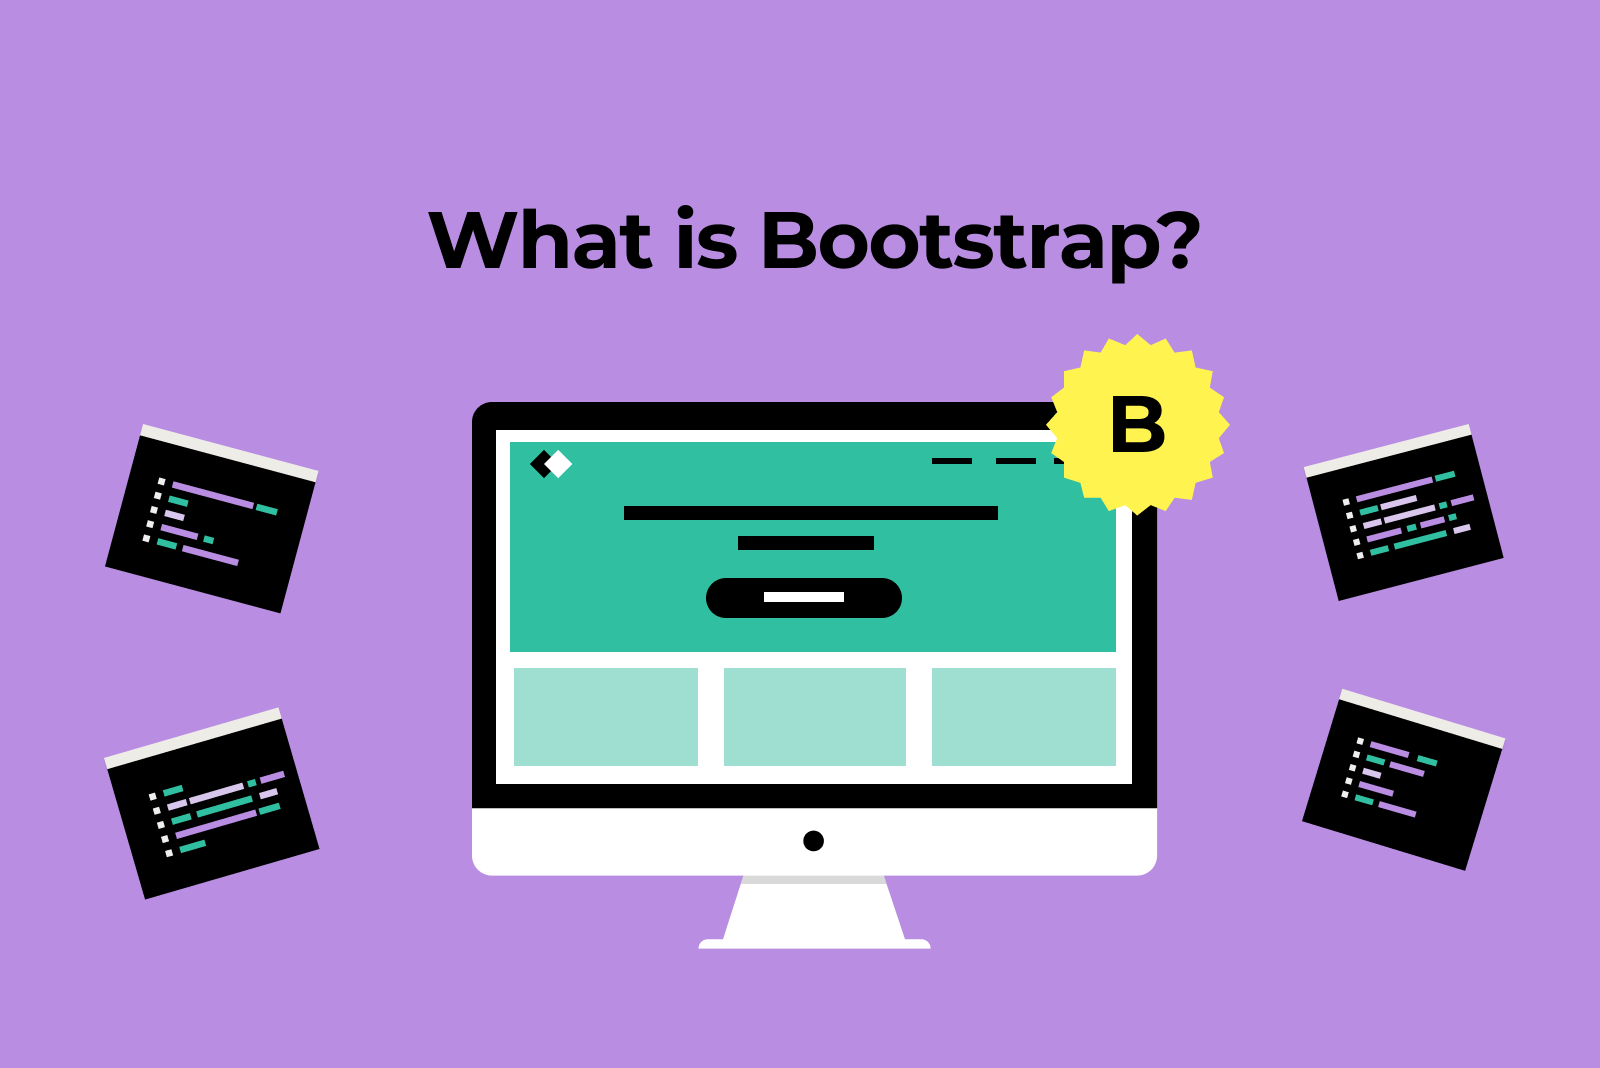 What is bootstrap?